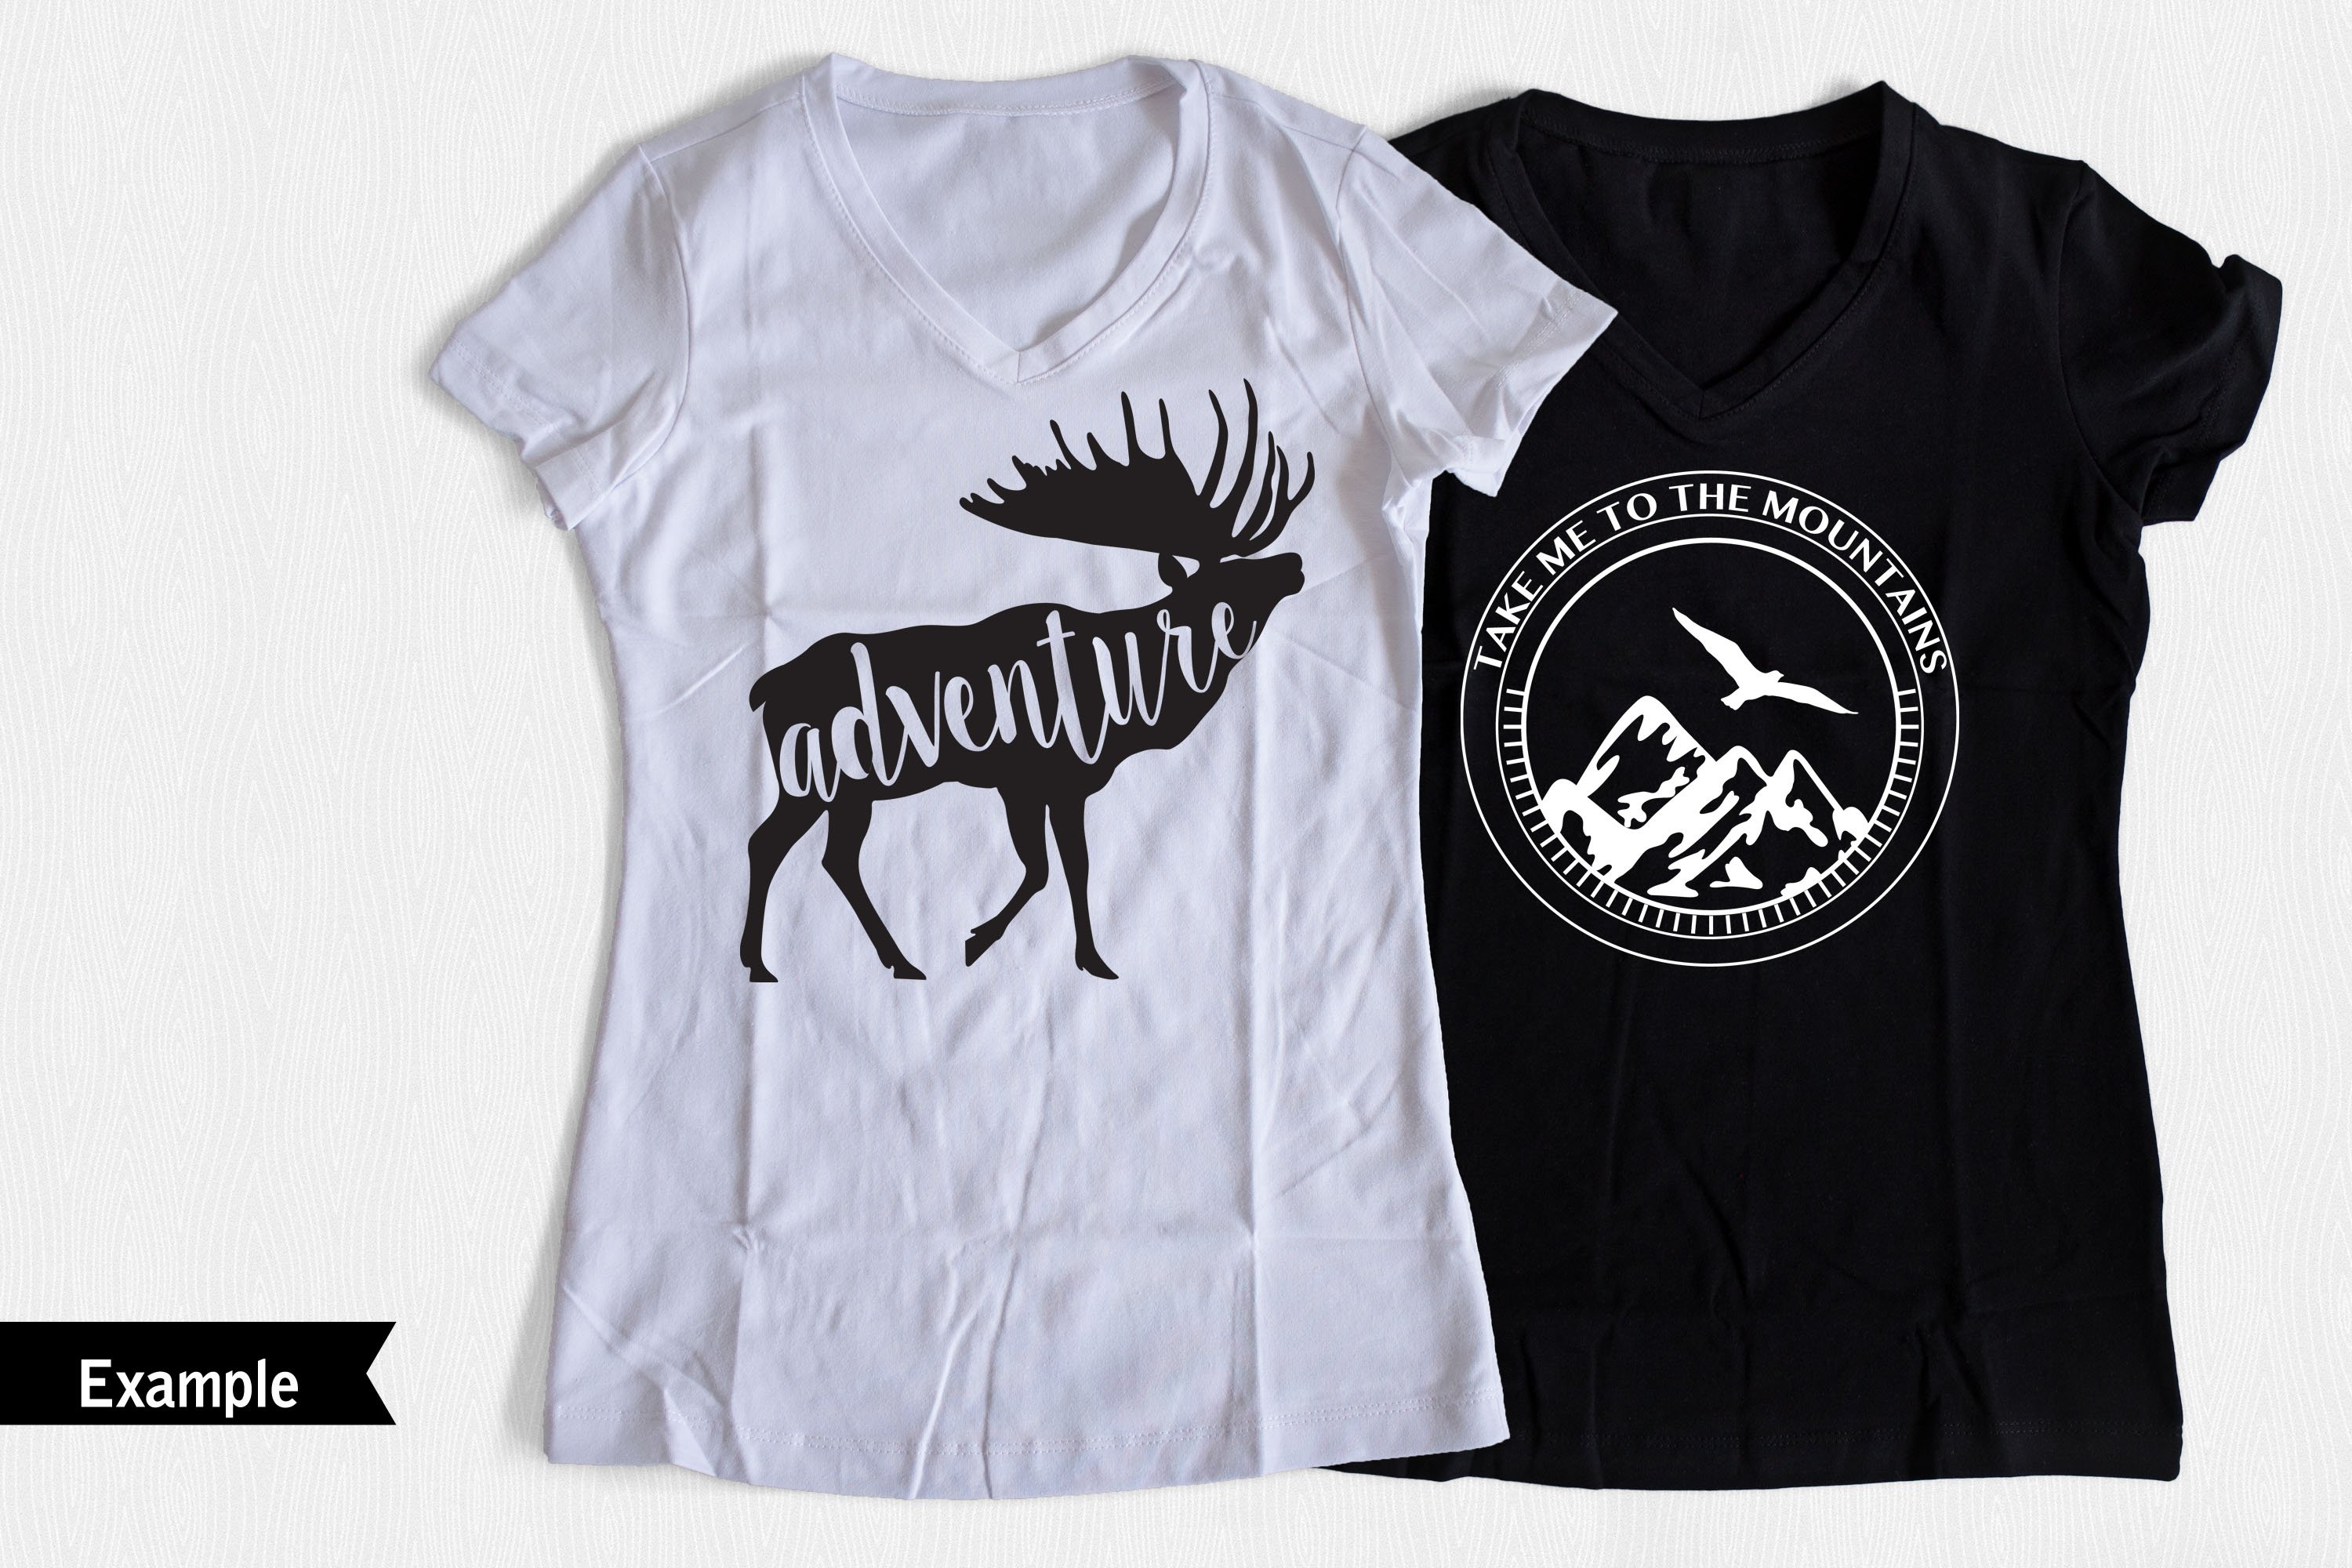 Two t-shirts - black and white - with deer graphic.